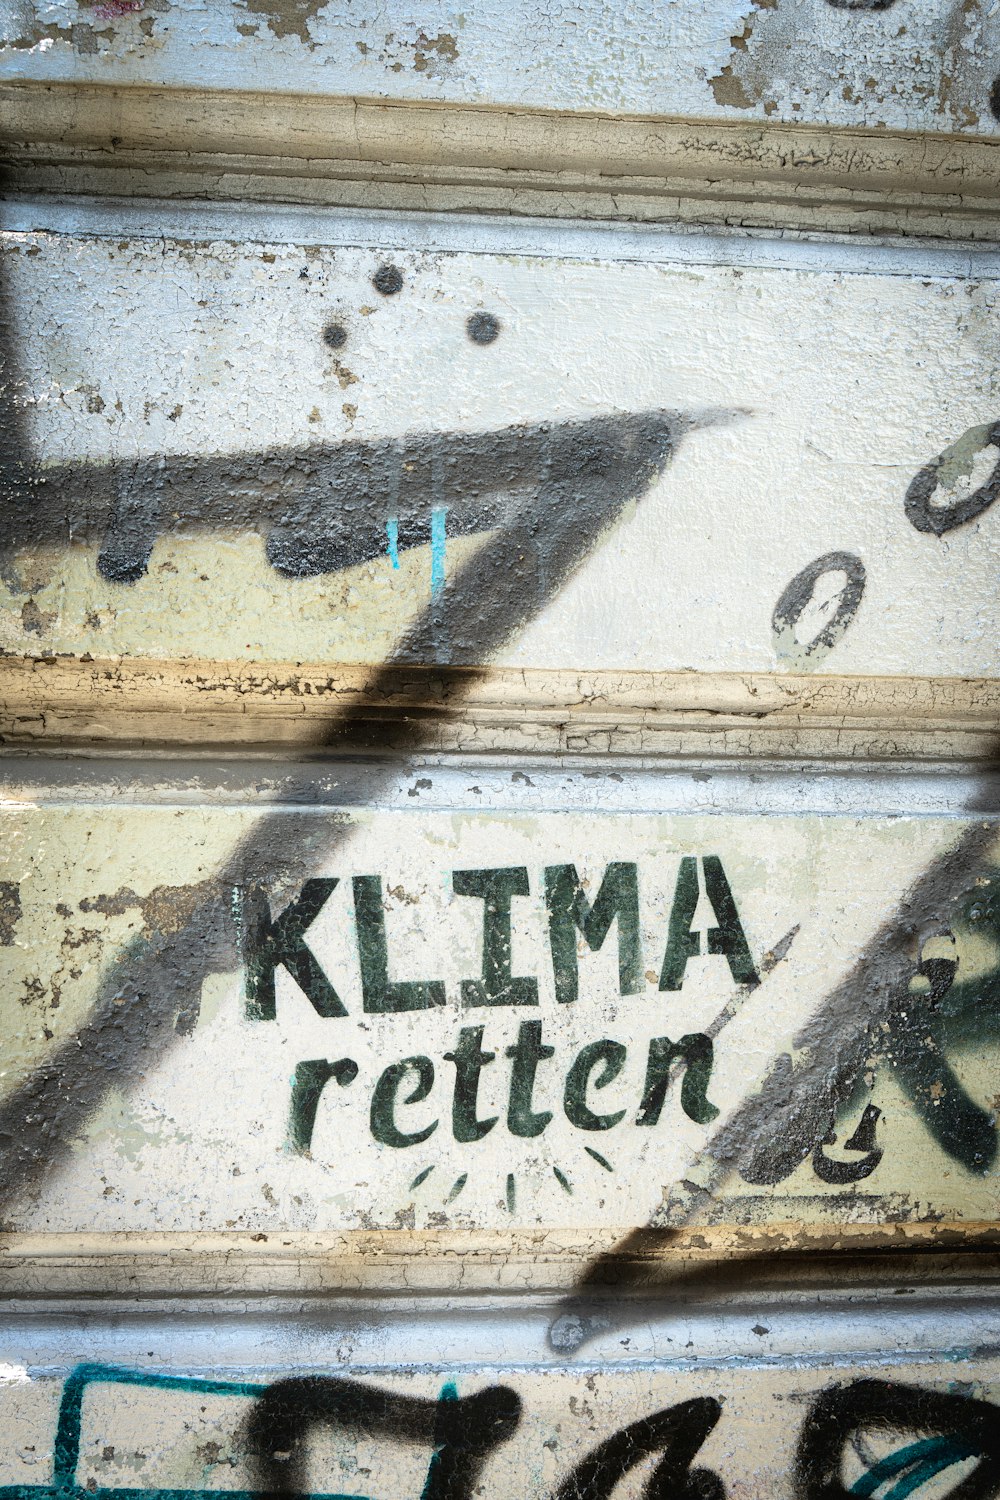 graffiti on the side of a building that says klima retten